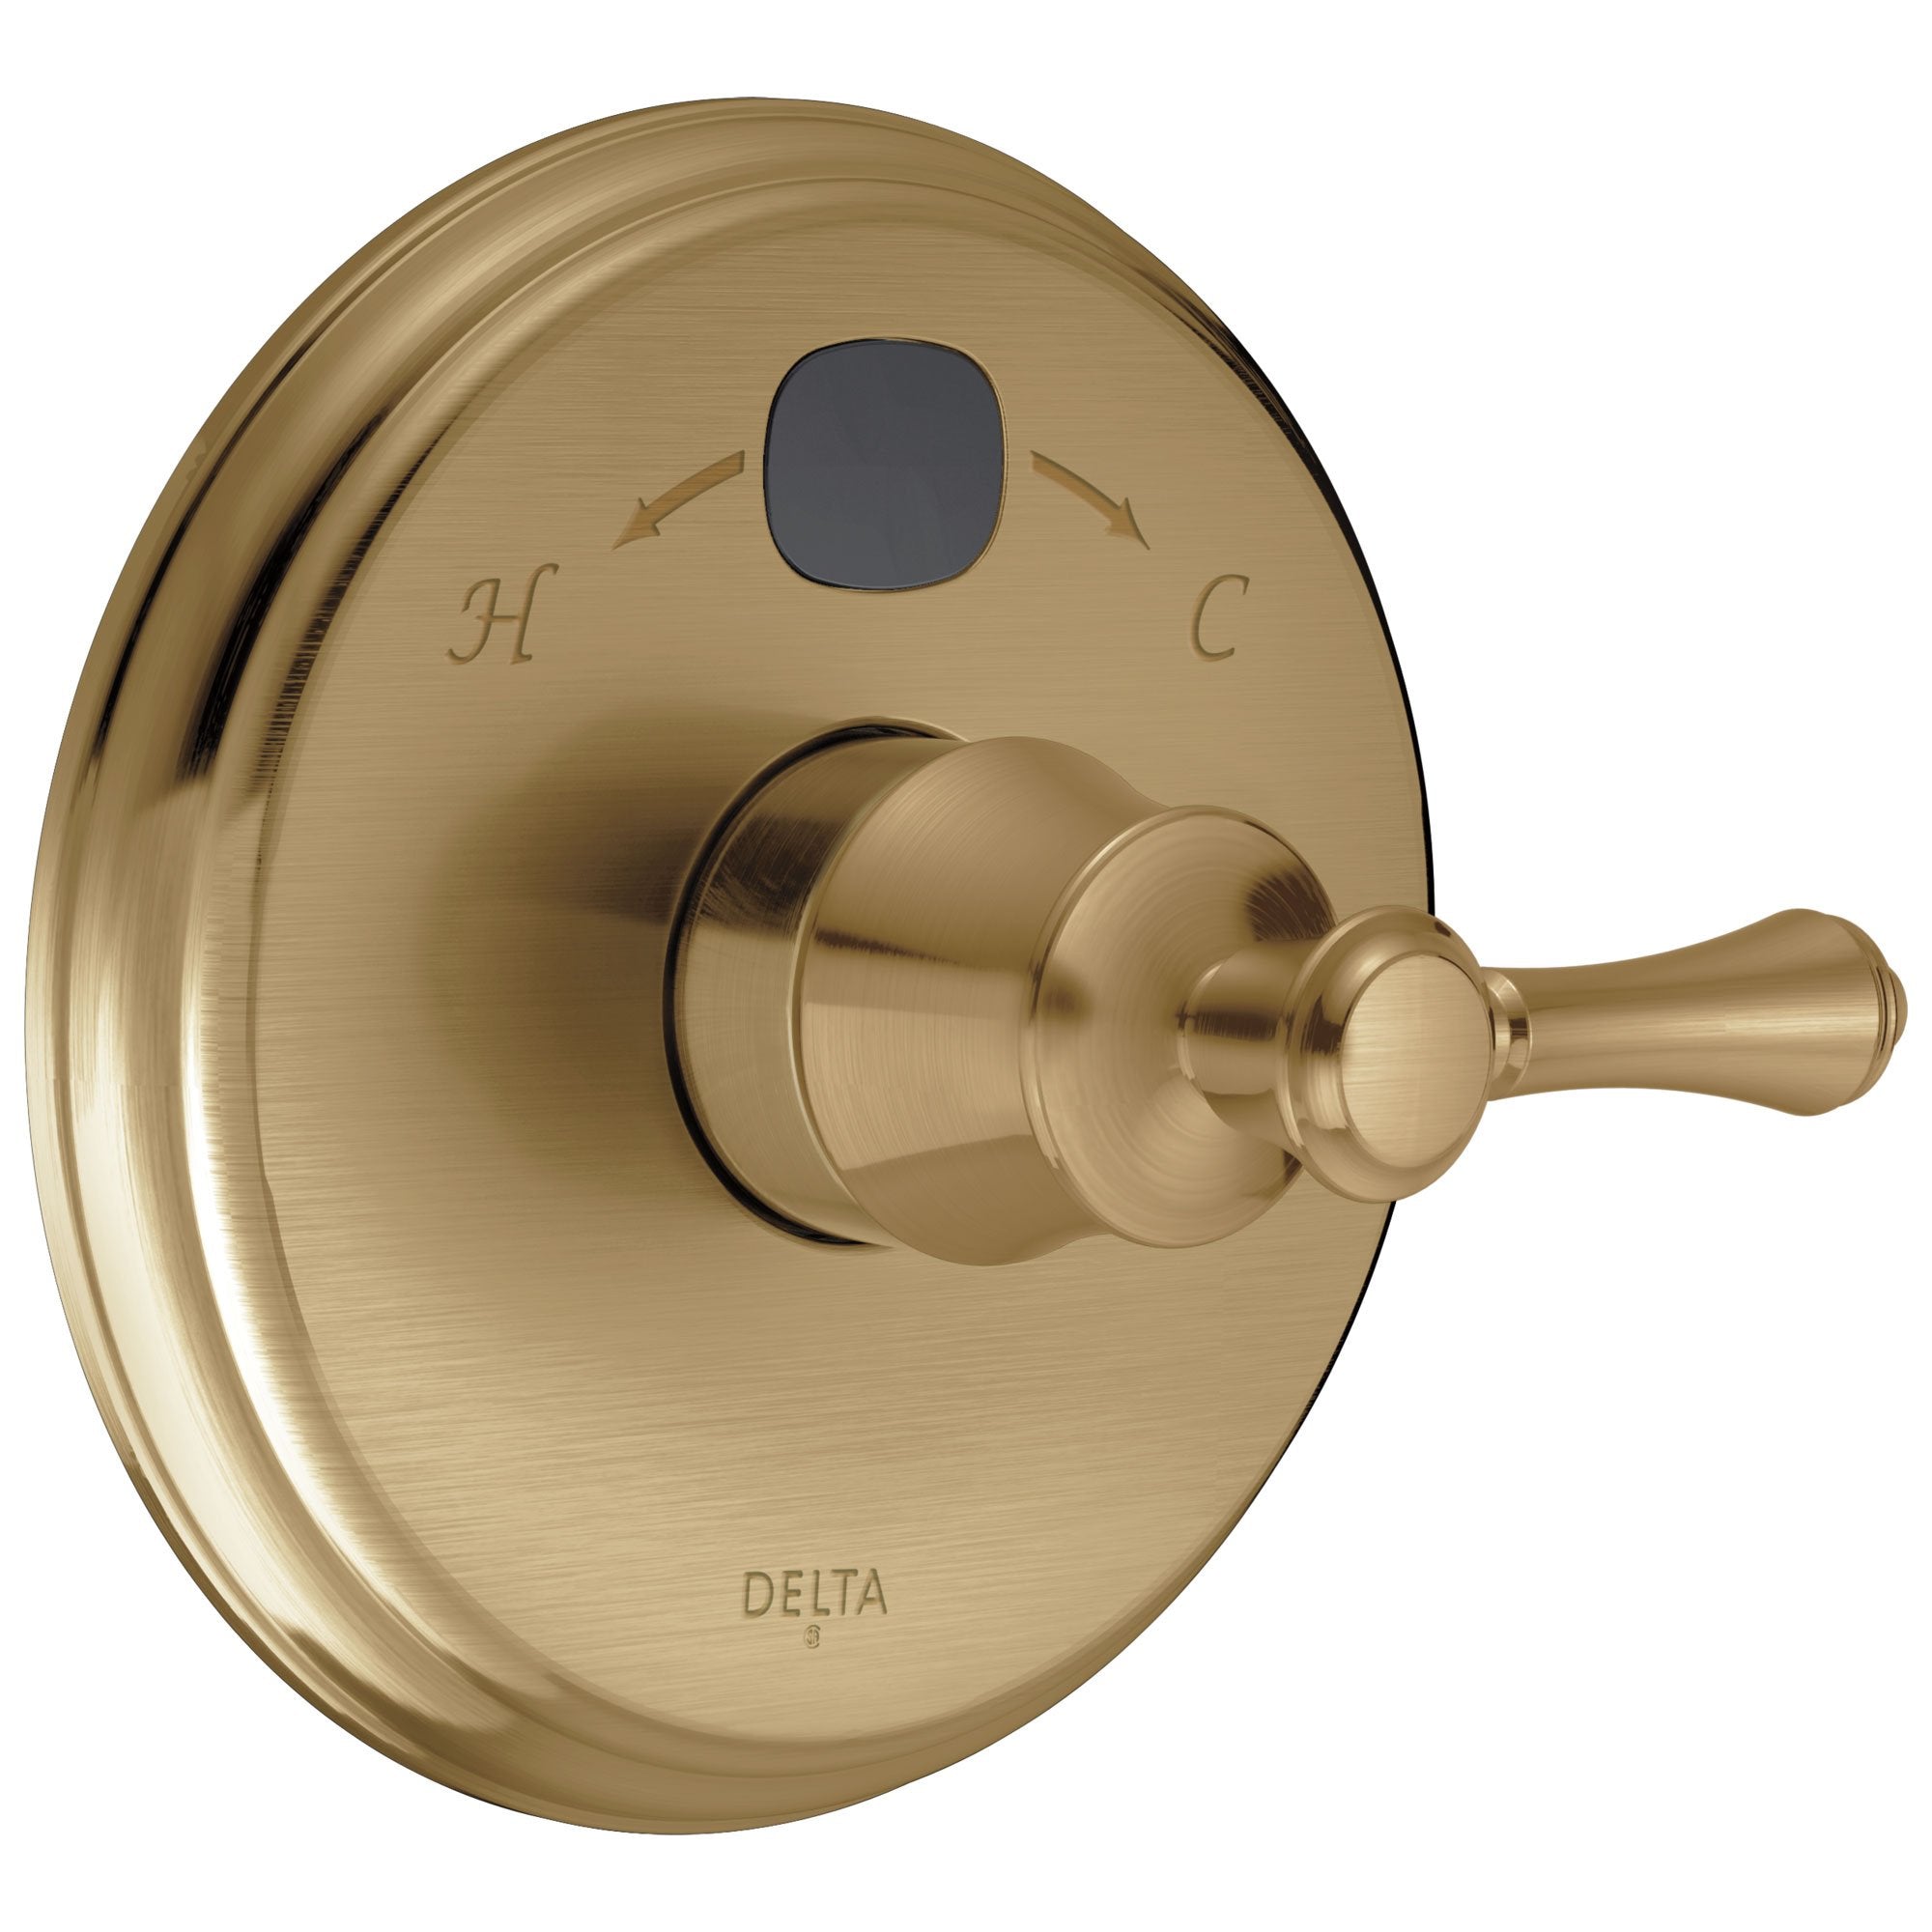 Delta Champagne Bronze Finish Cassidy 14 Series Temp2O Shower Faucet Valve Control Only Includes Single Lever Handle and Valve without Stops D1886V